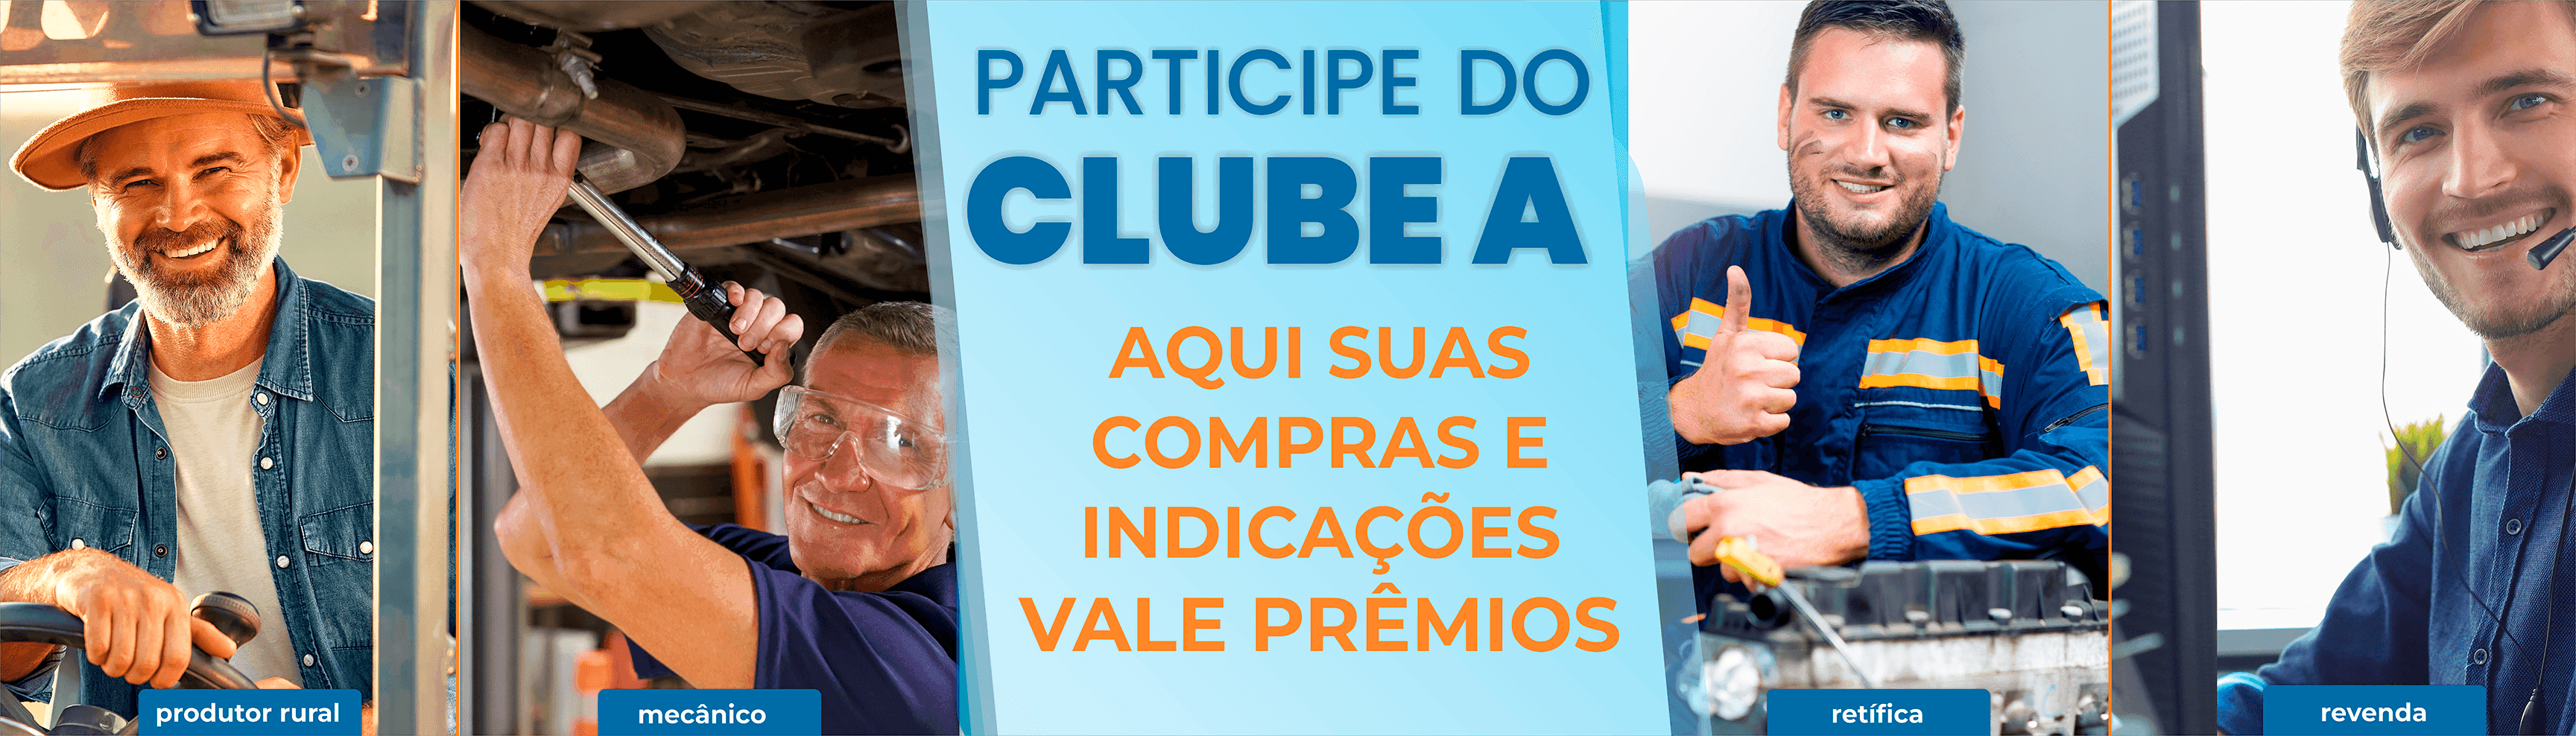 Banner participe clube a